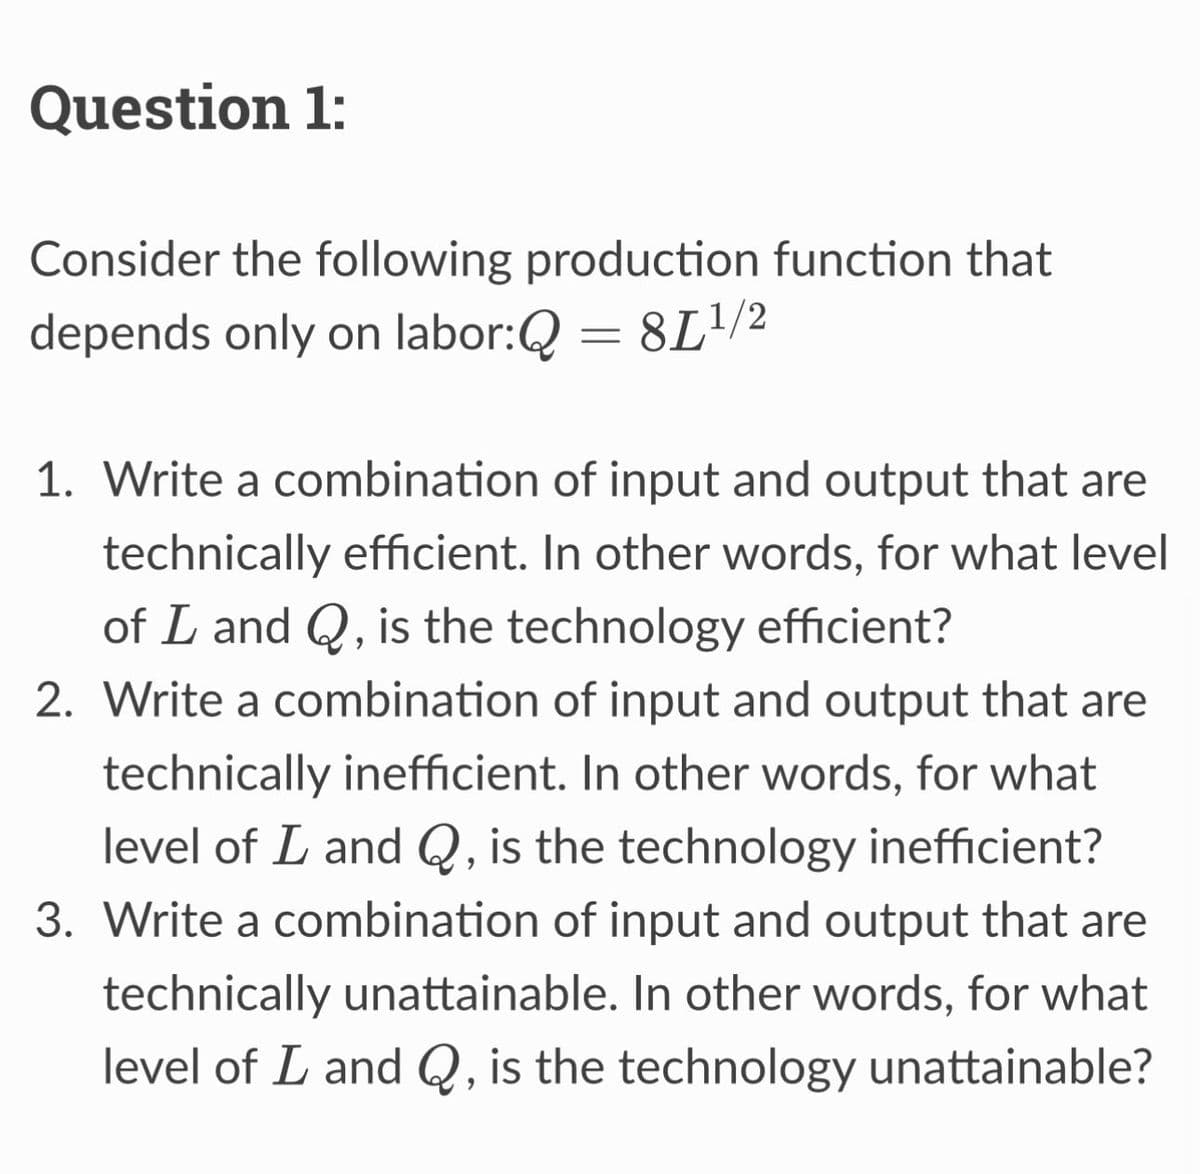 Question 1:
Consider the following production function that
depends only on labor:Q = 81¹/2
1. Write a combination of input and output that are
technically efficient. In other words, for what level
of L and Q, is the technology efficient?
2. Write a combination of input and output that are
technically inefficient. In other words, for what
level of L and Q, is the technology inefficient?
3. Write a combination of input and output that are
technically unattainable. In other words, for what
level of I and Q, is the technology unattainable?